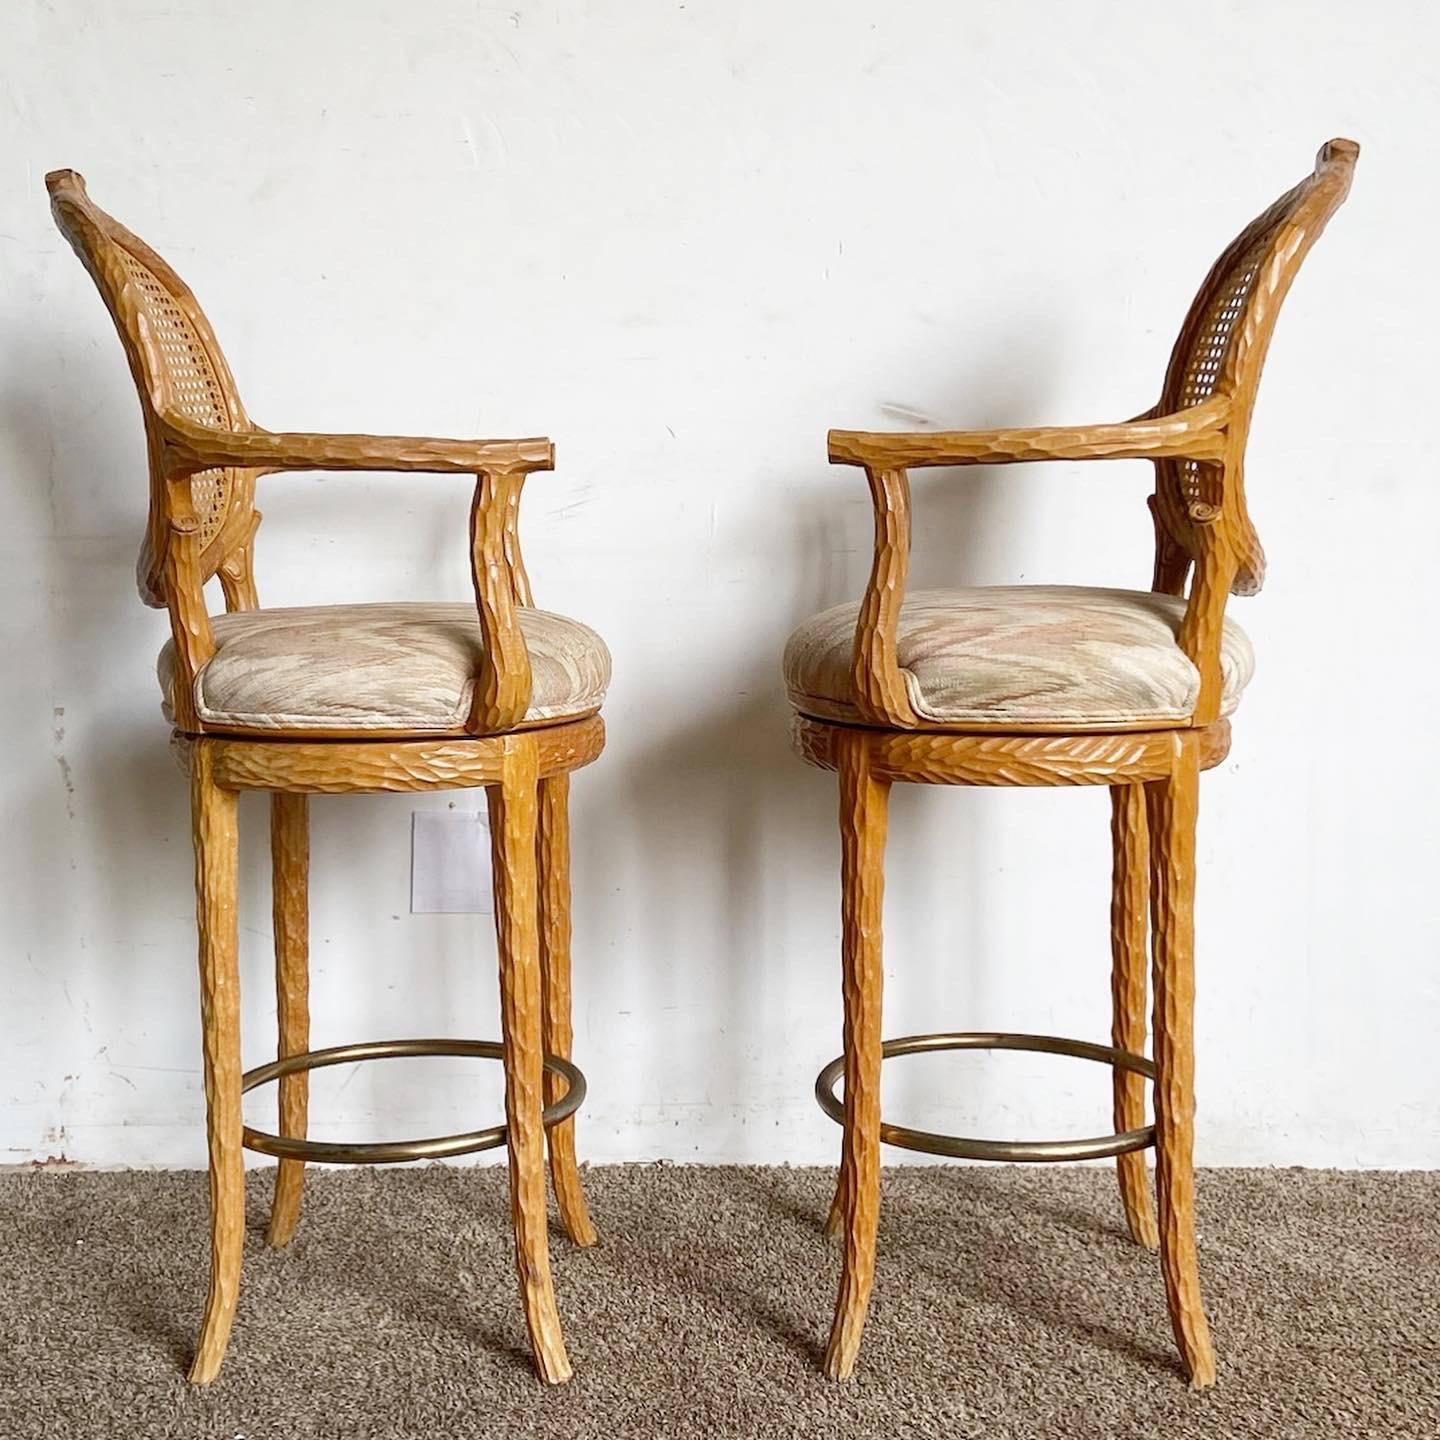 Enhance your home's comfort and style with these Regency Cane Back Sculpted Swivel Counter Stools. A vintage-meets-modern blend of function and sophistication.
Some wear and crack in in one of the arm rests.